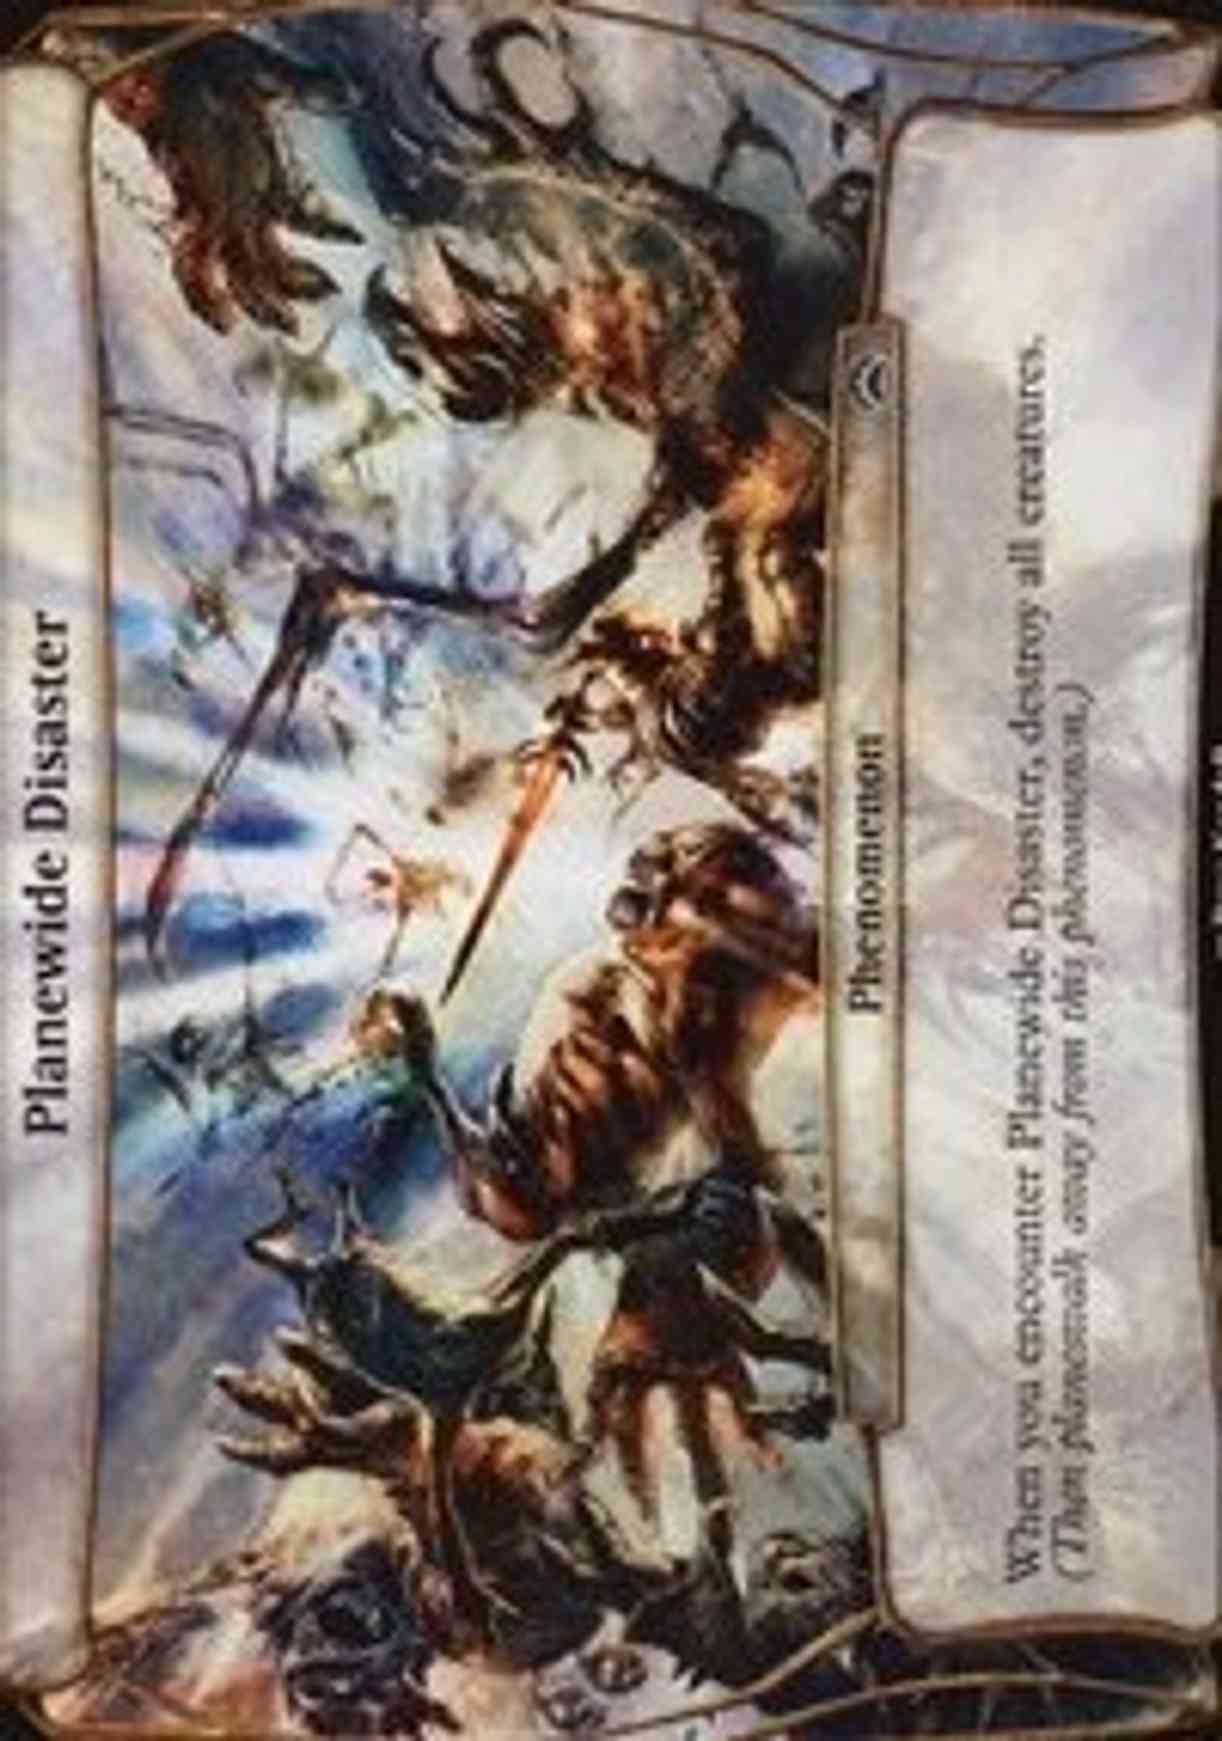 Planewide Disaster (Planechase 2012) magic card front